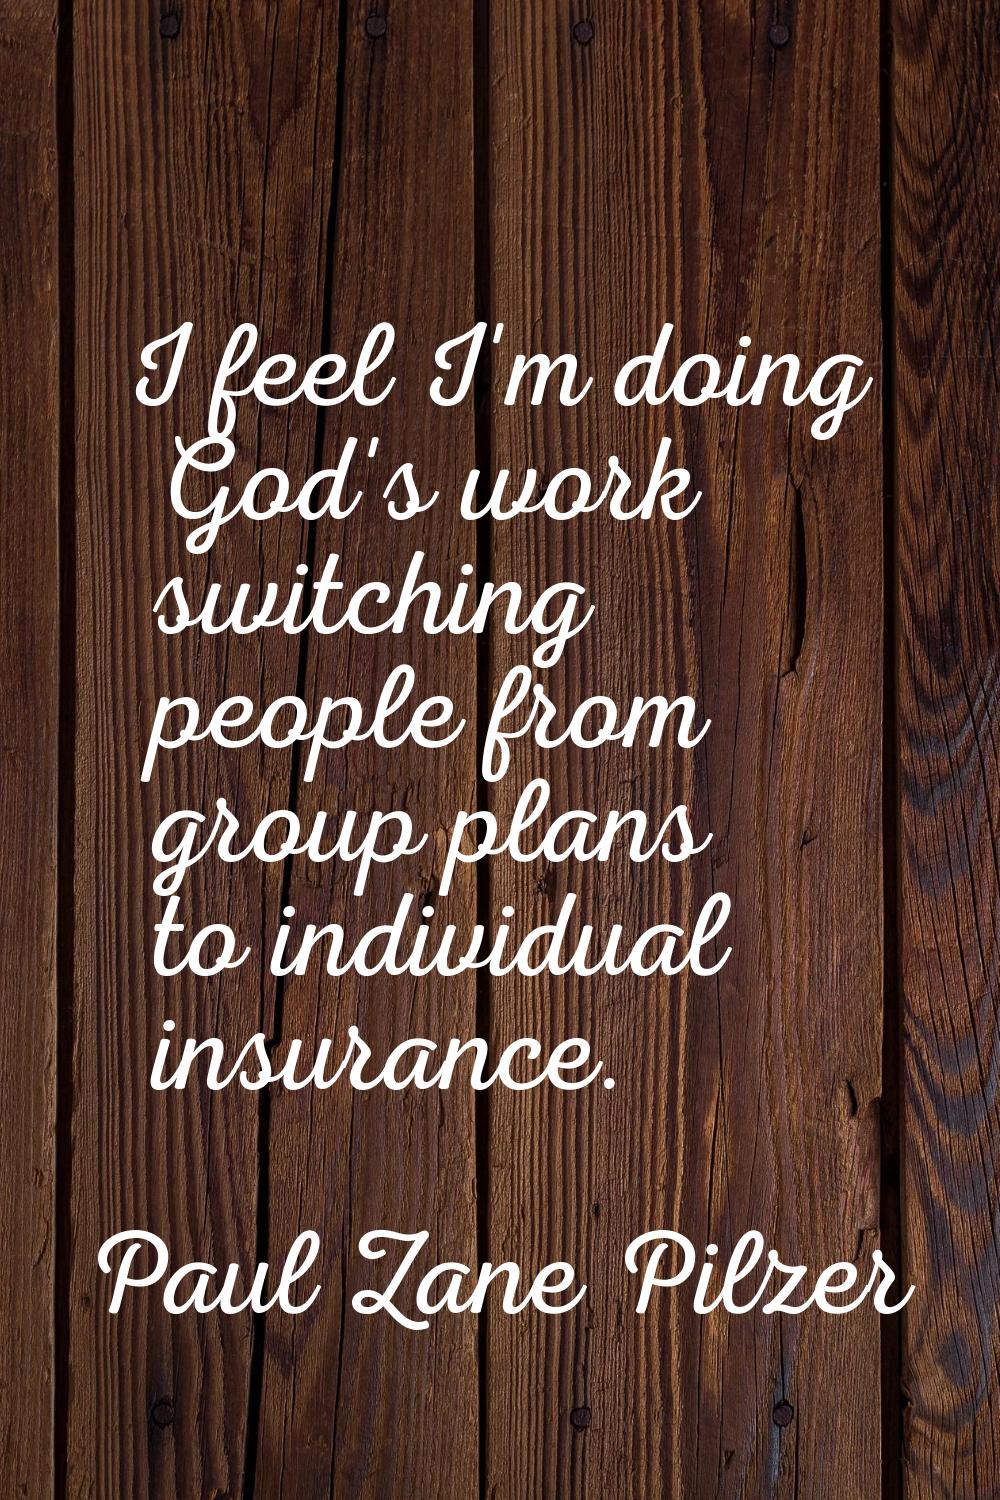 I feel I'm doing God's work switching people from group plans to individual insurance.